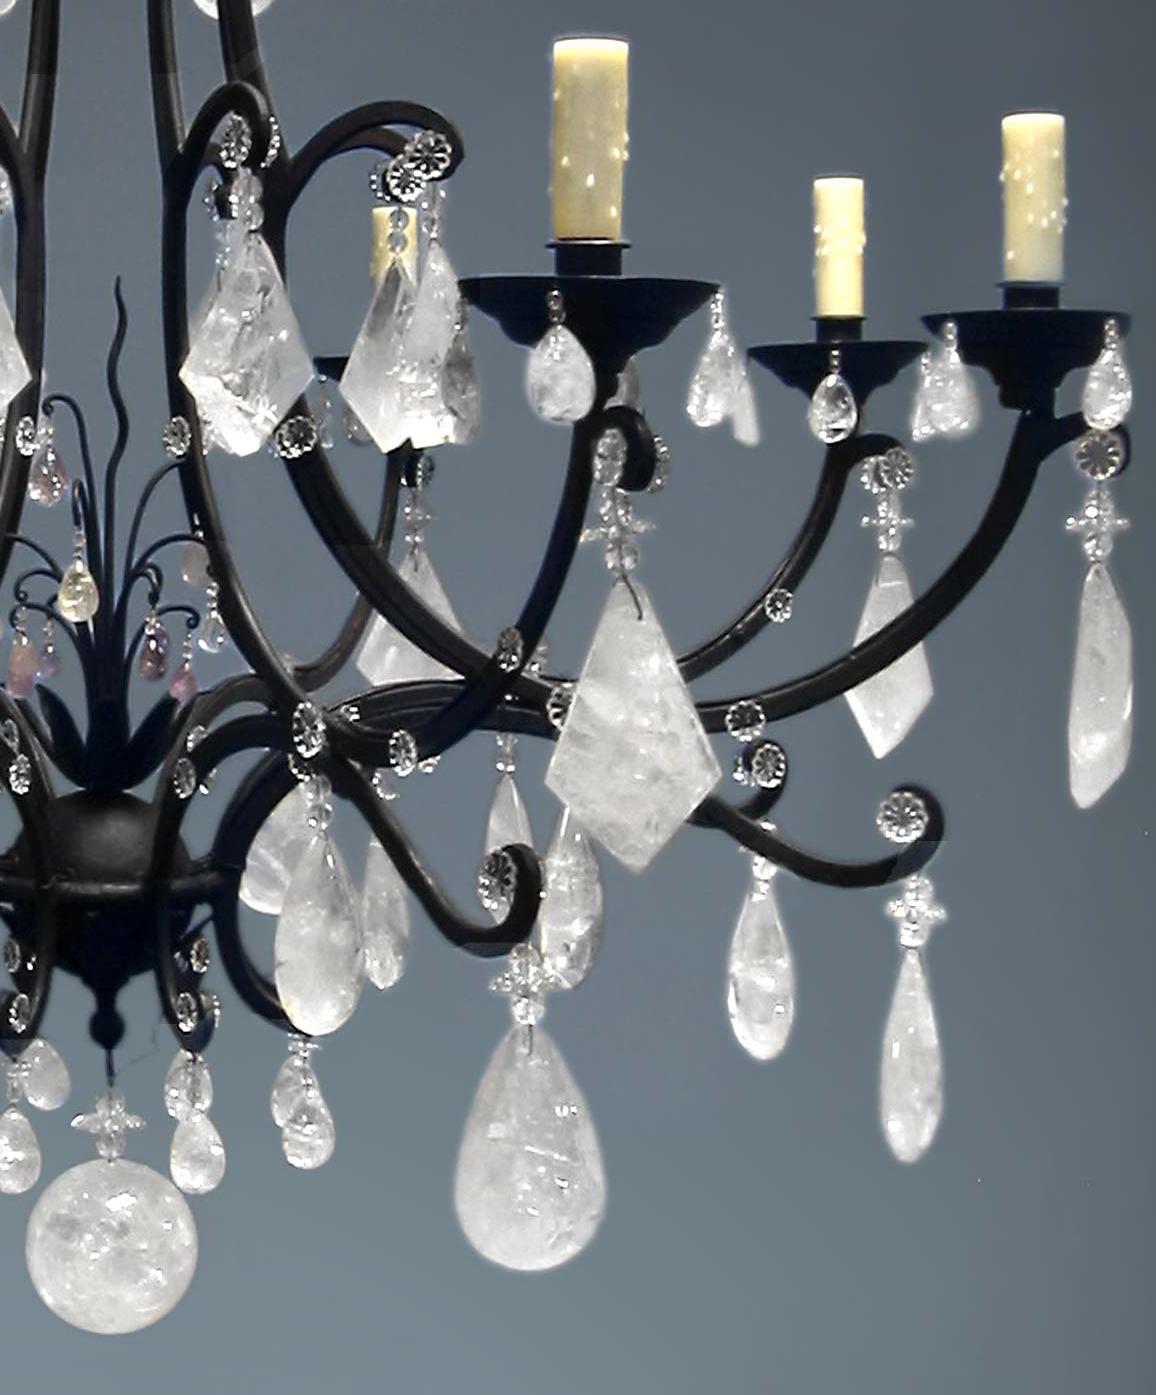 iron chandeliers with crystals